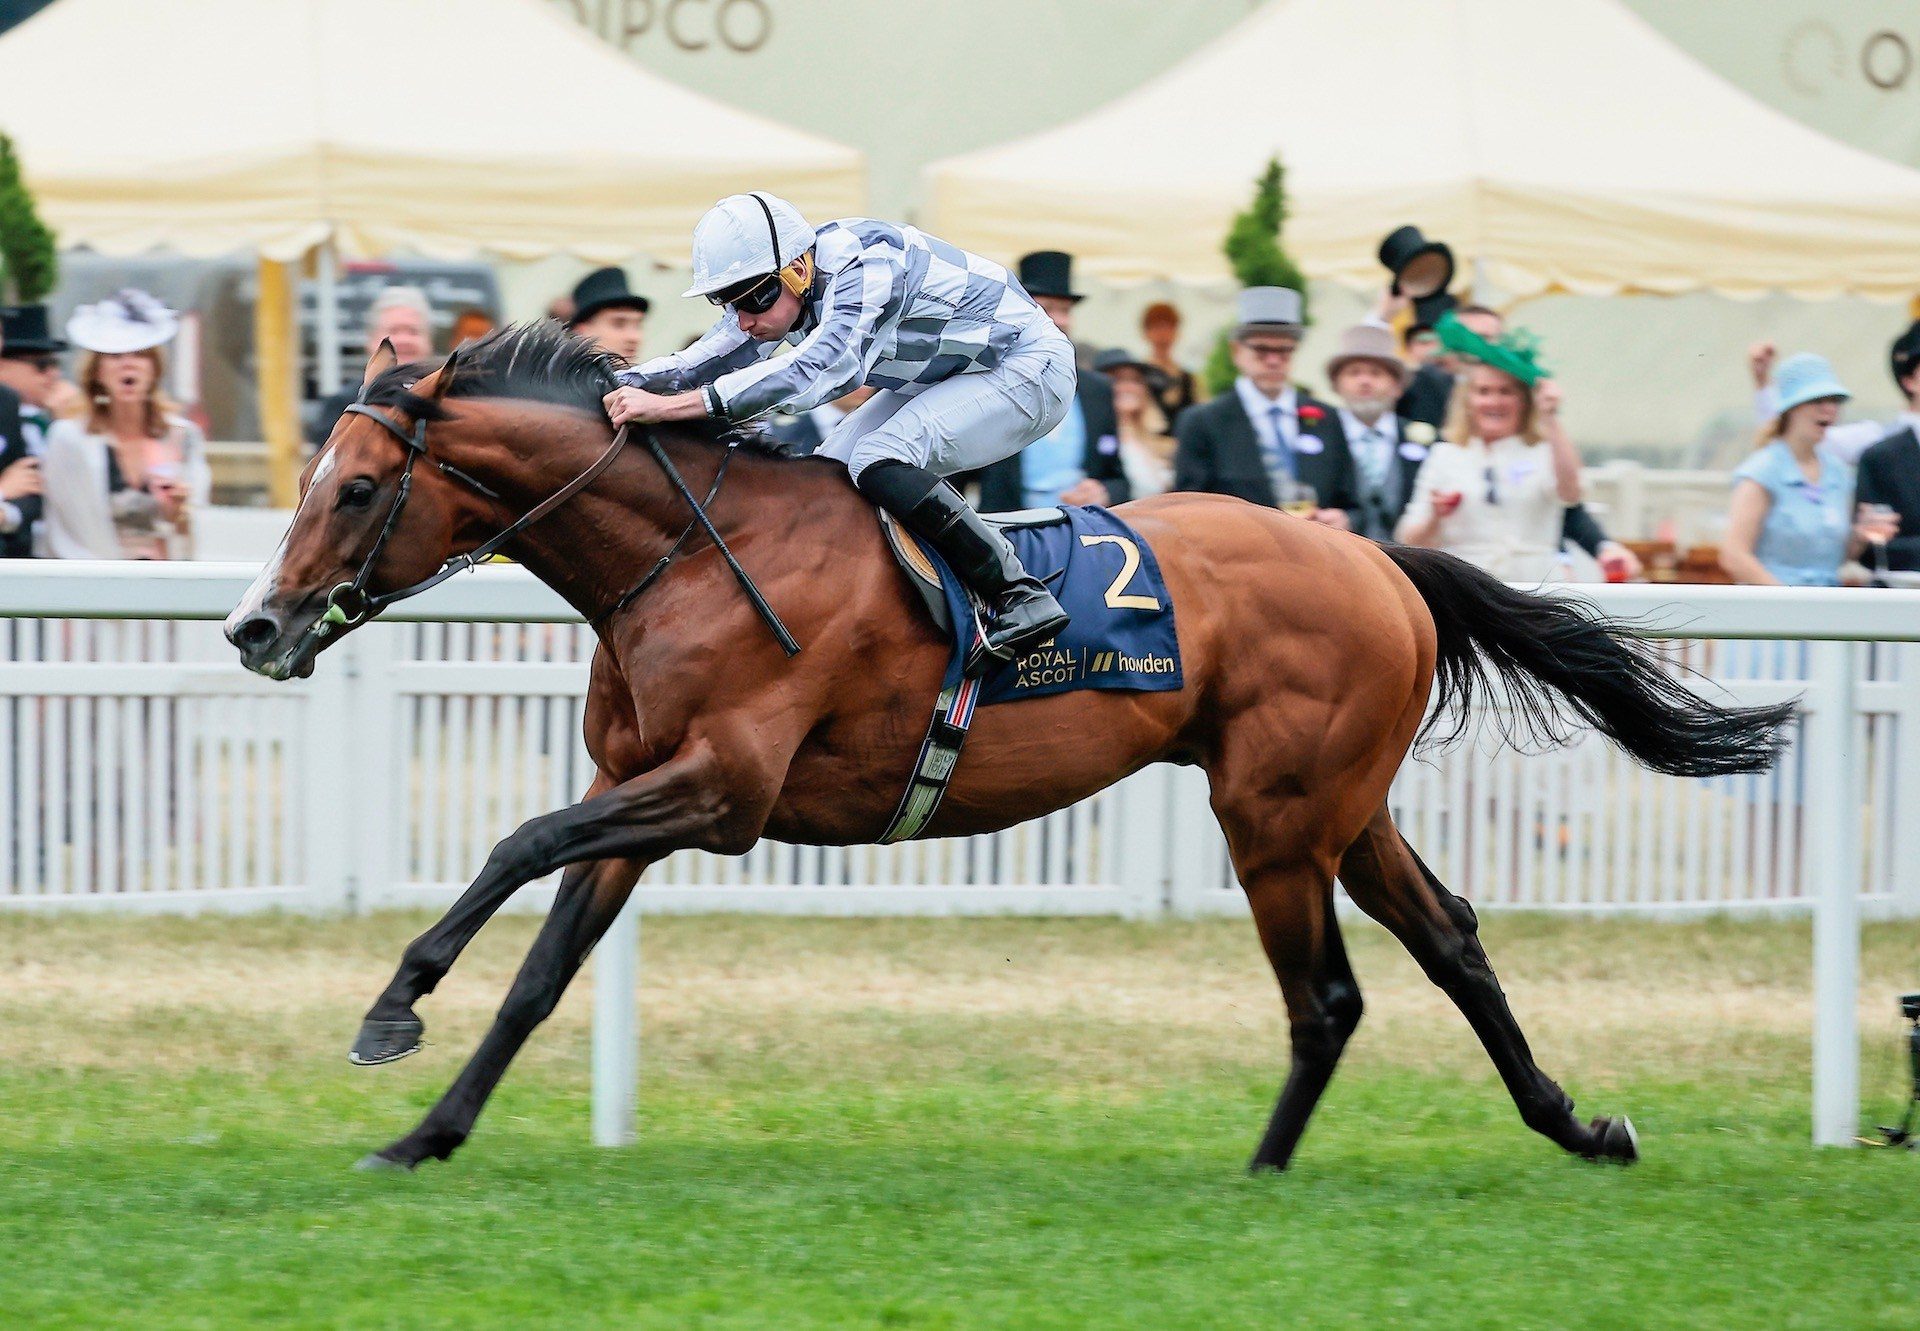 Broome (Australia) Wins The Group 2 Hardwicke Stakes At Royal Ascot